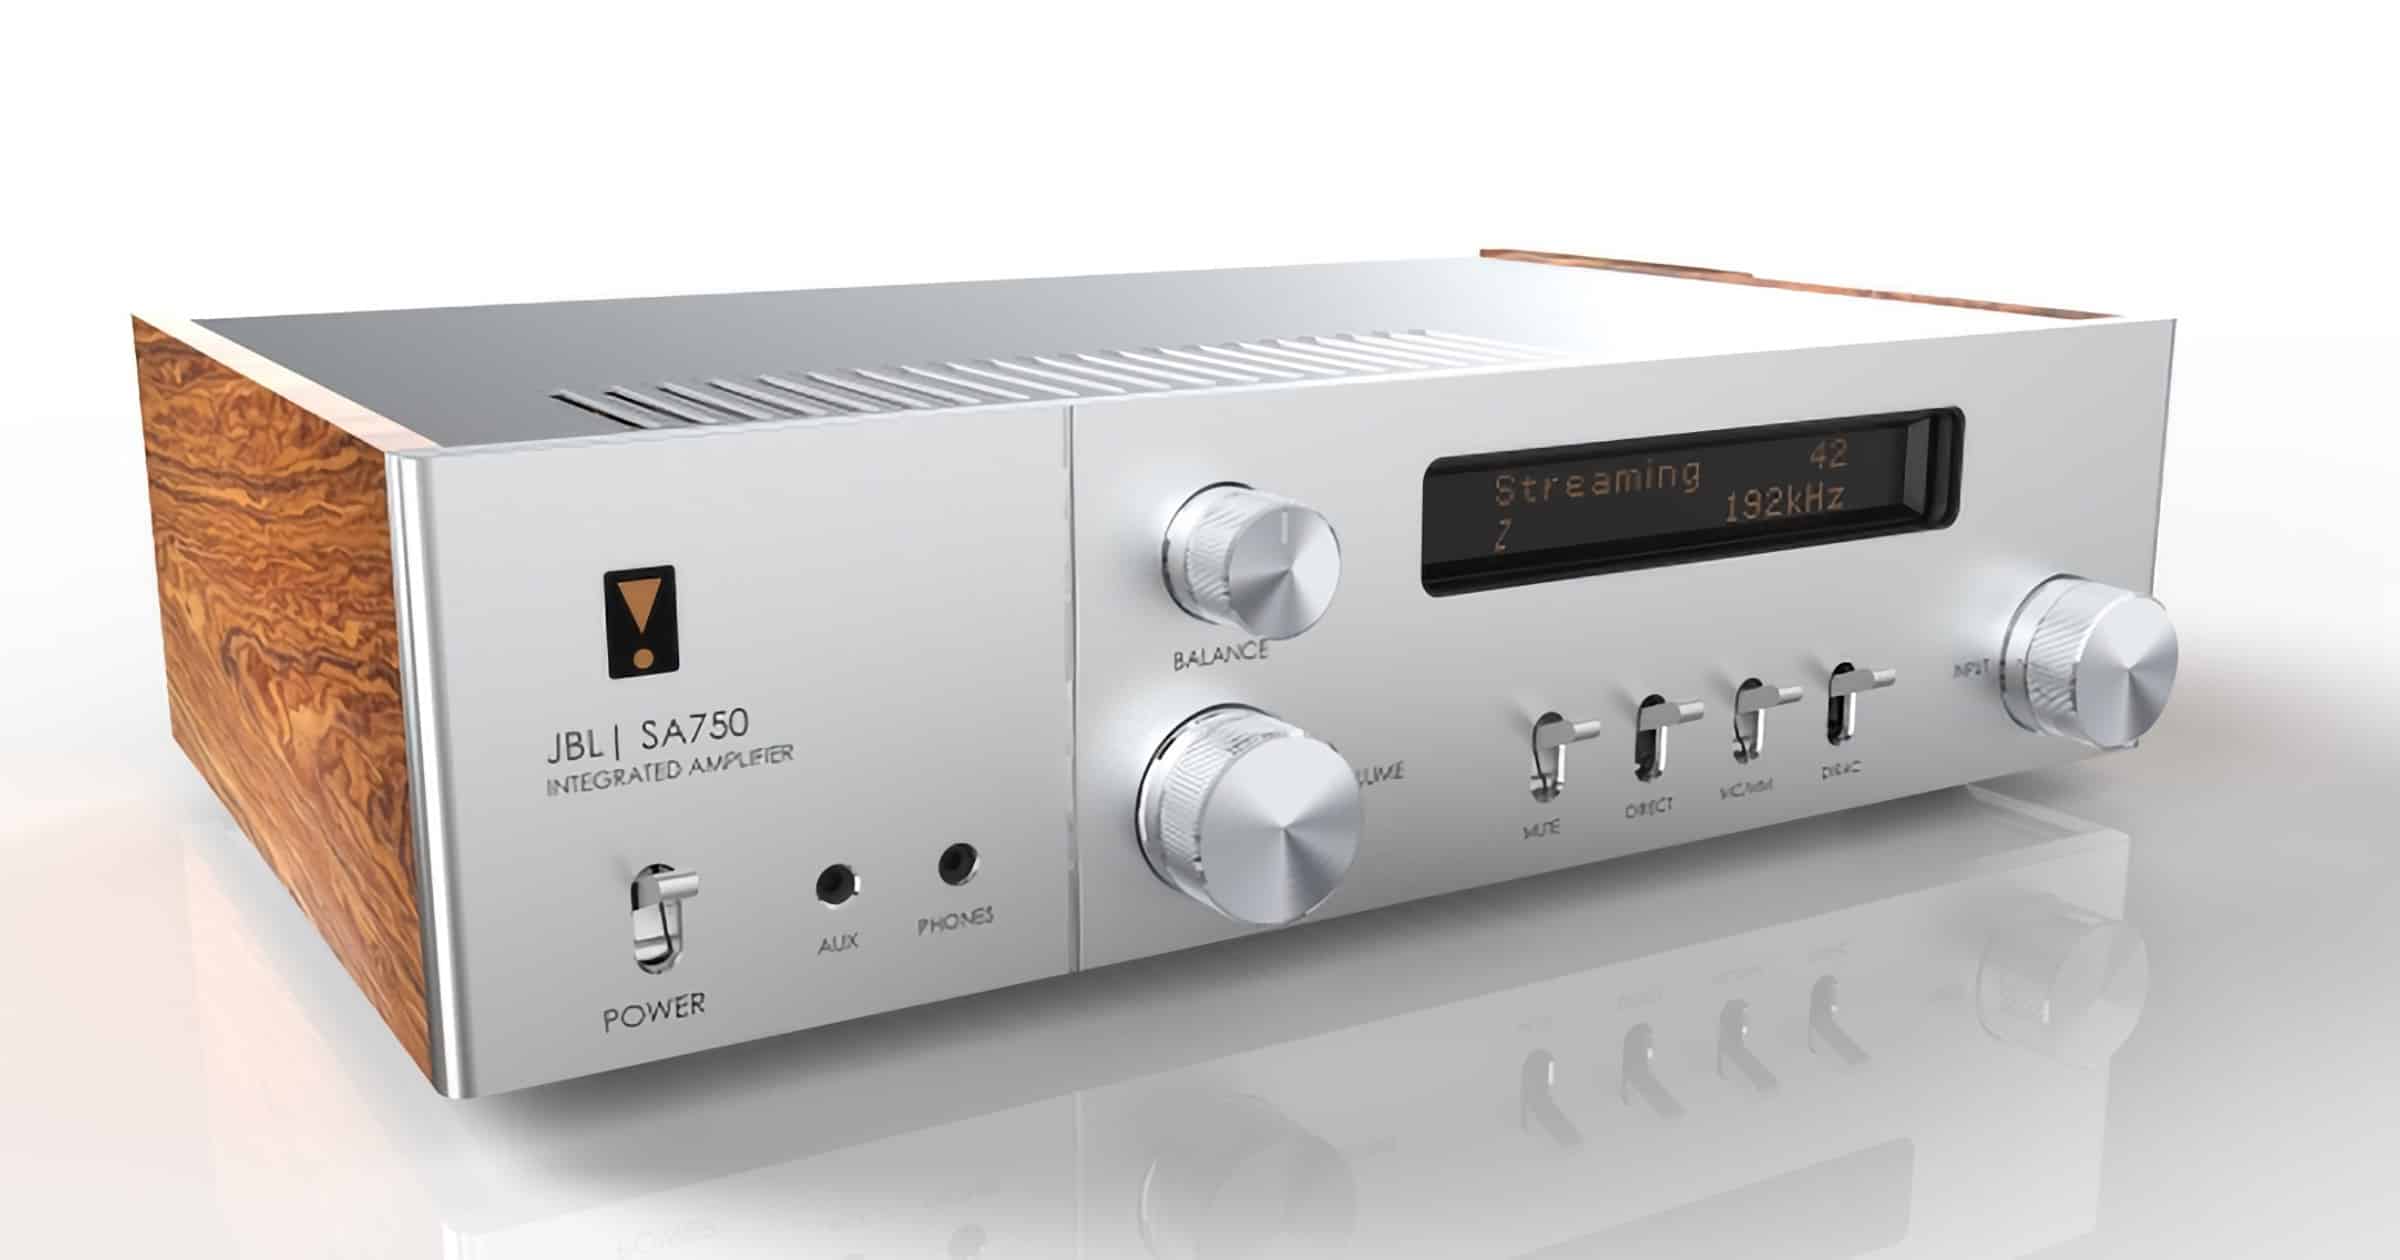 JBL Introduces 75th Anniversary JBL SA750 Integrated Amplifier With AirPlay 2